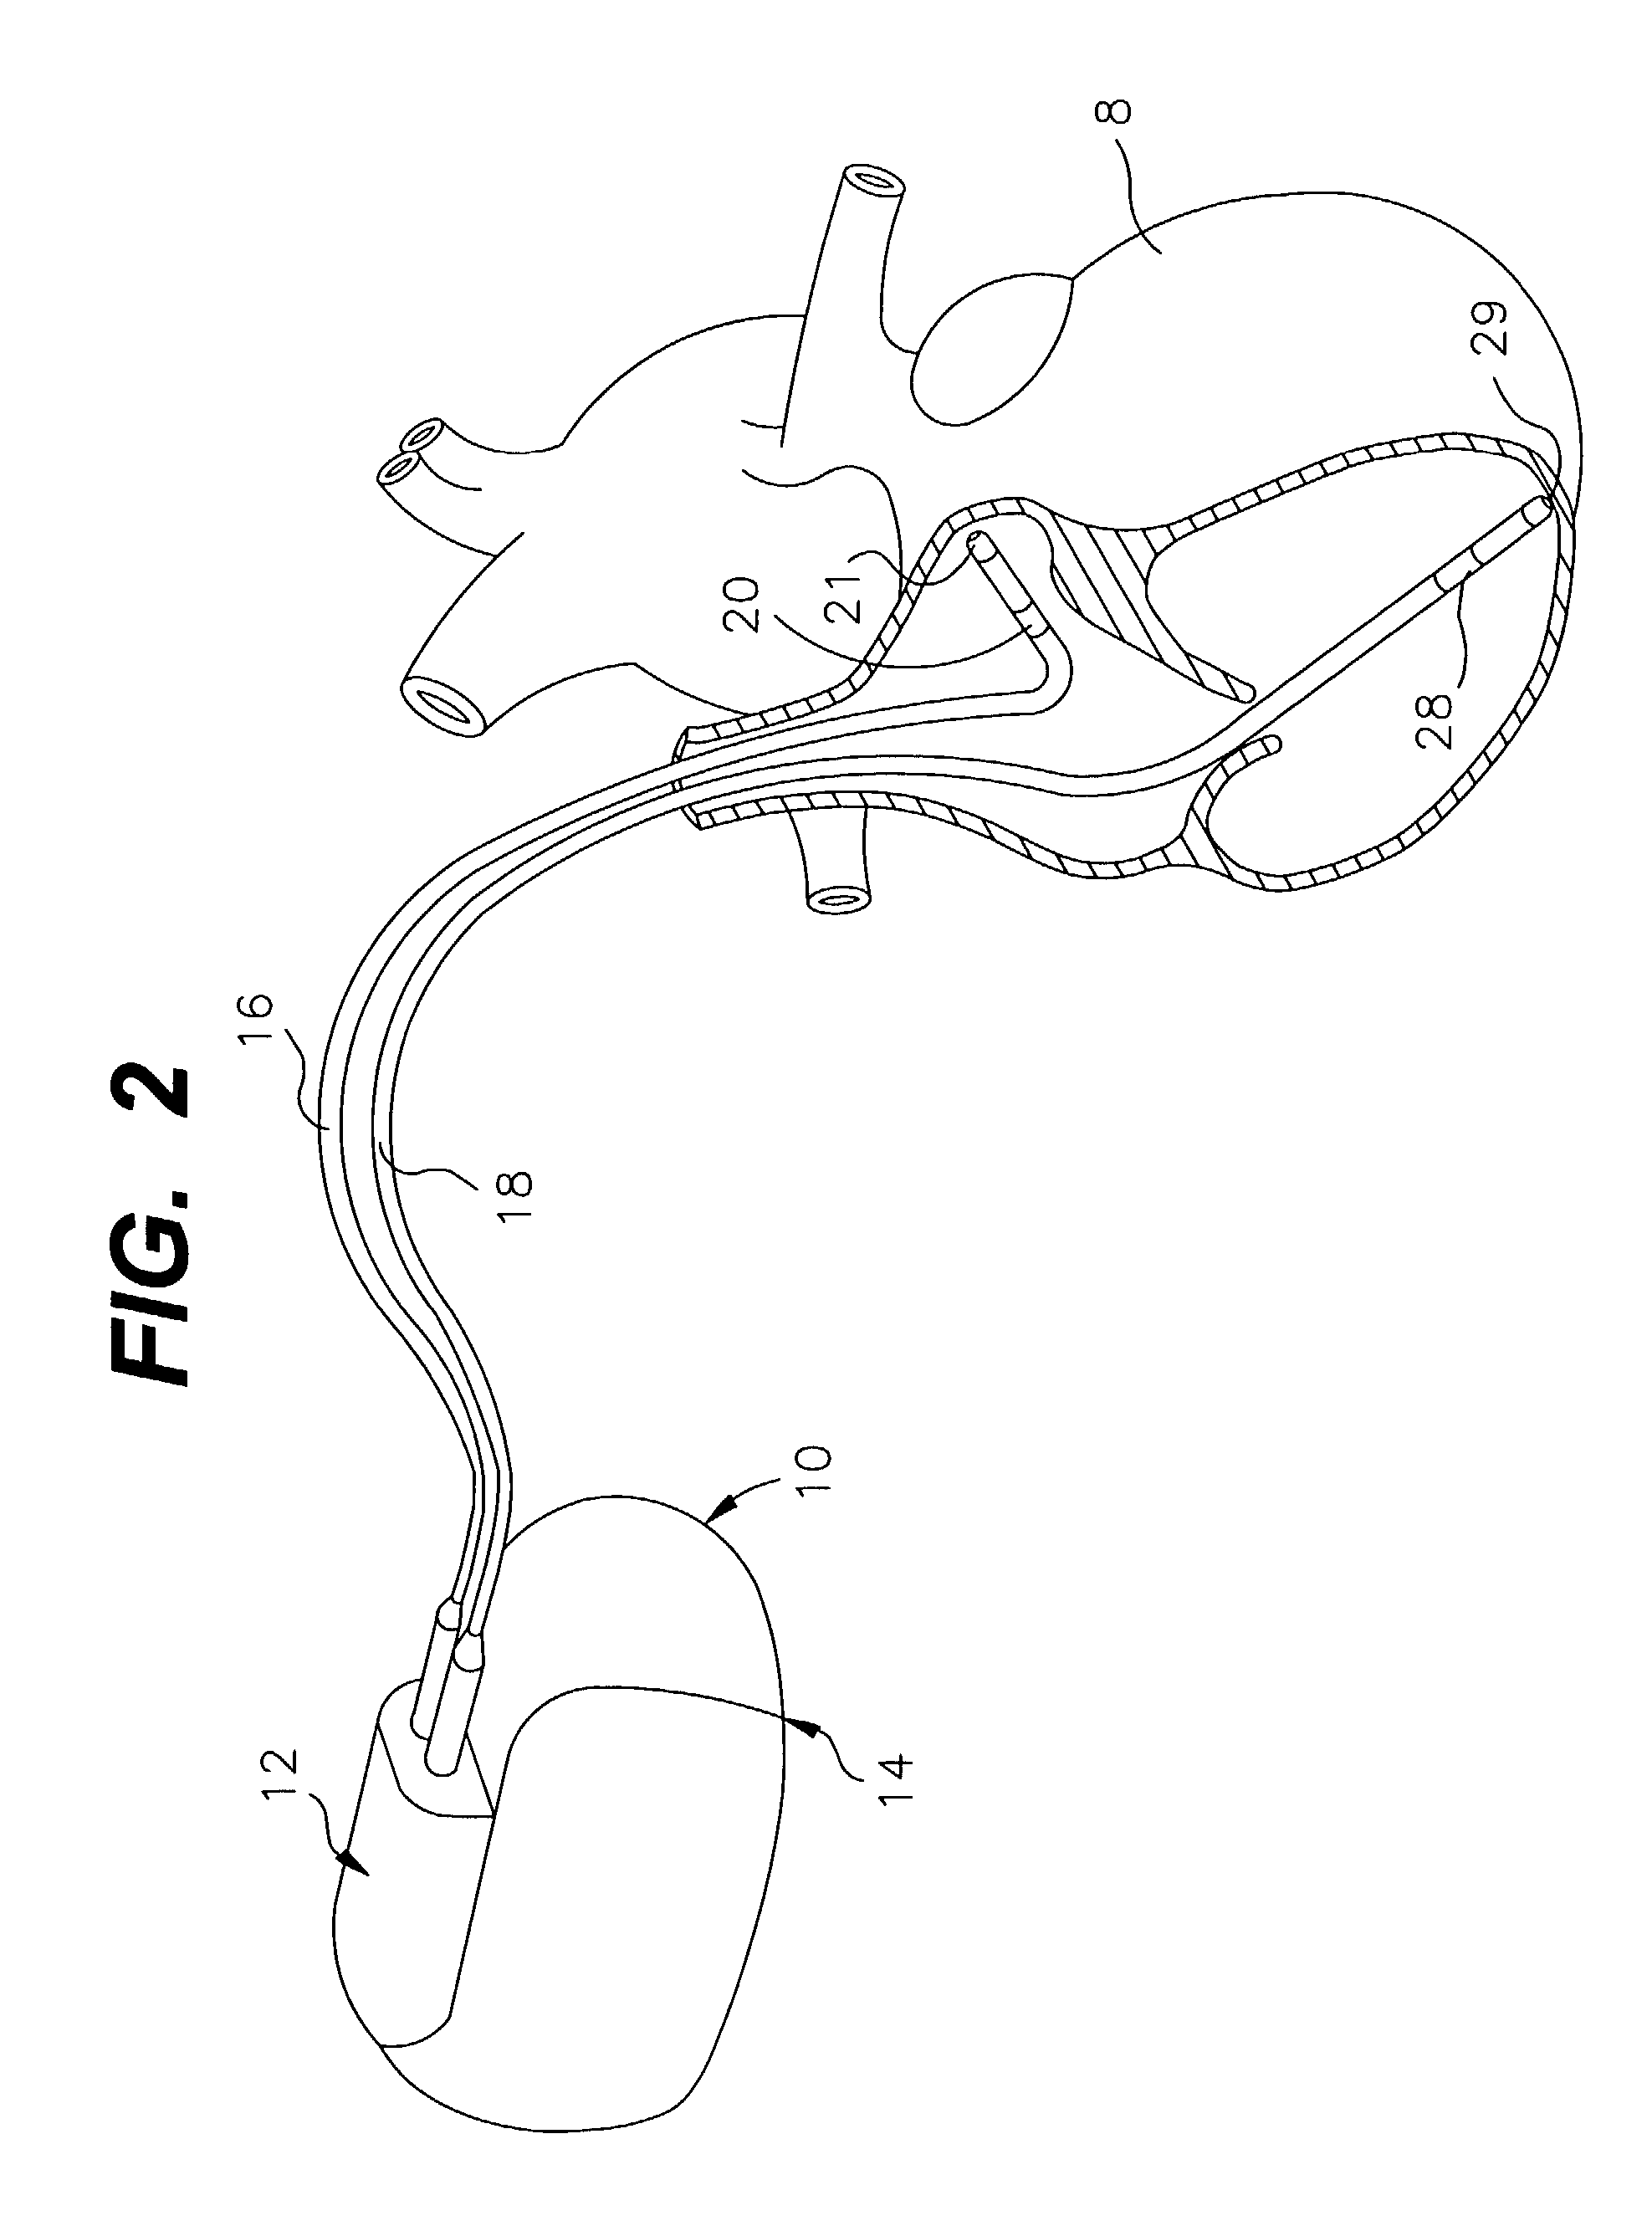 Method and system for determining kidney failure